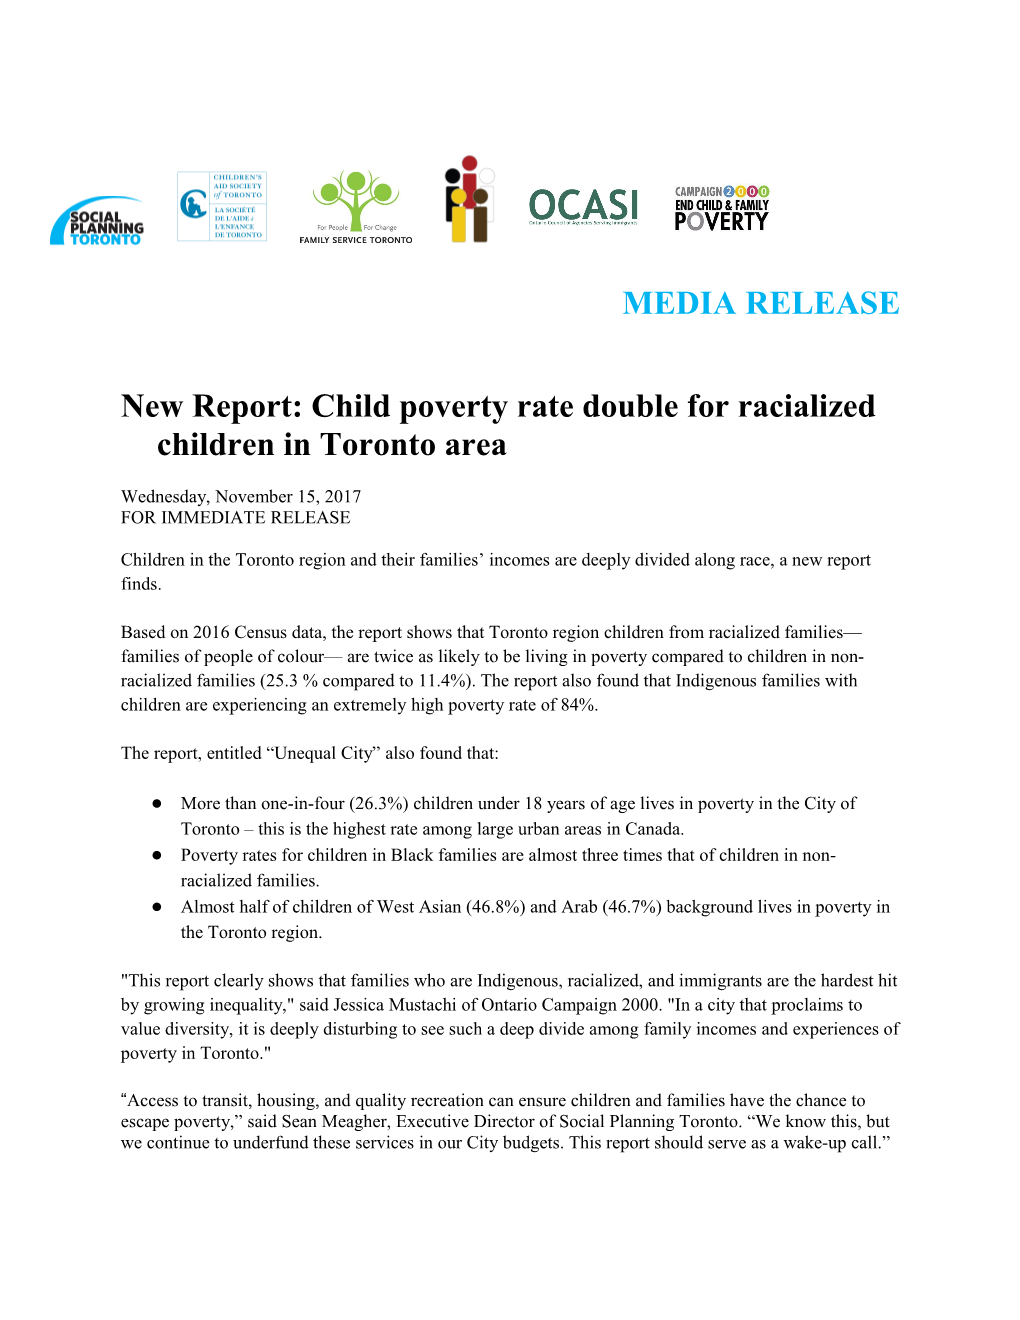 New Report: Child Poverty Rate Double for Racialized Children in Toronto Area